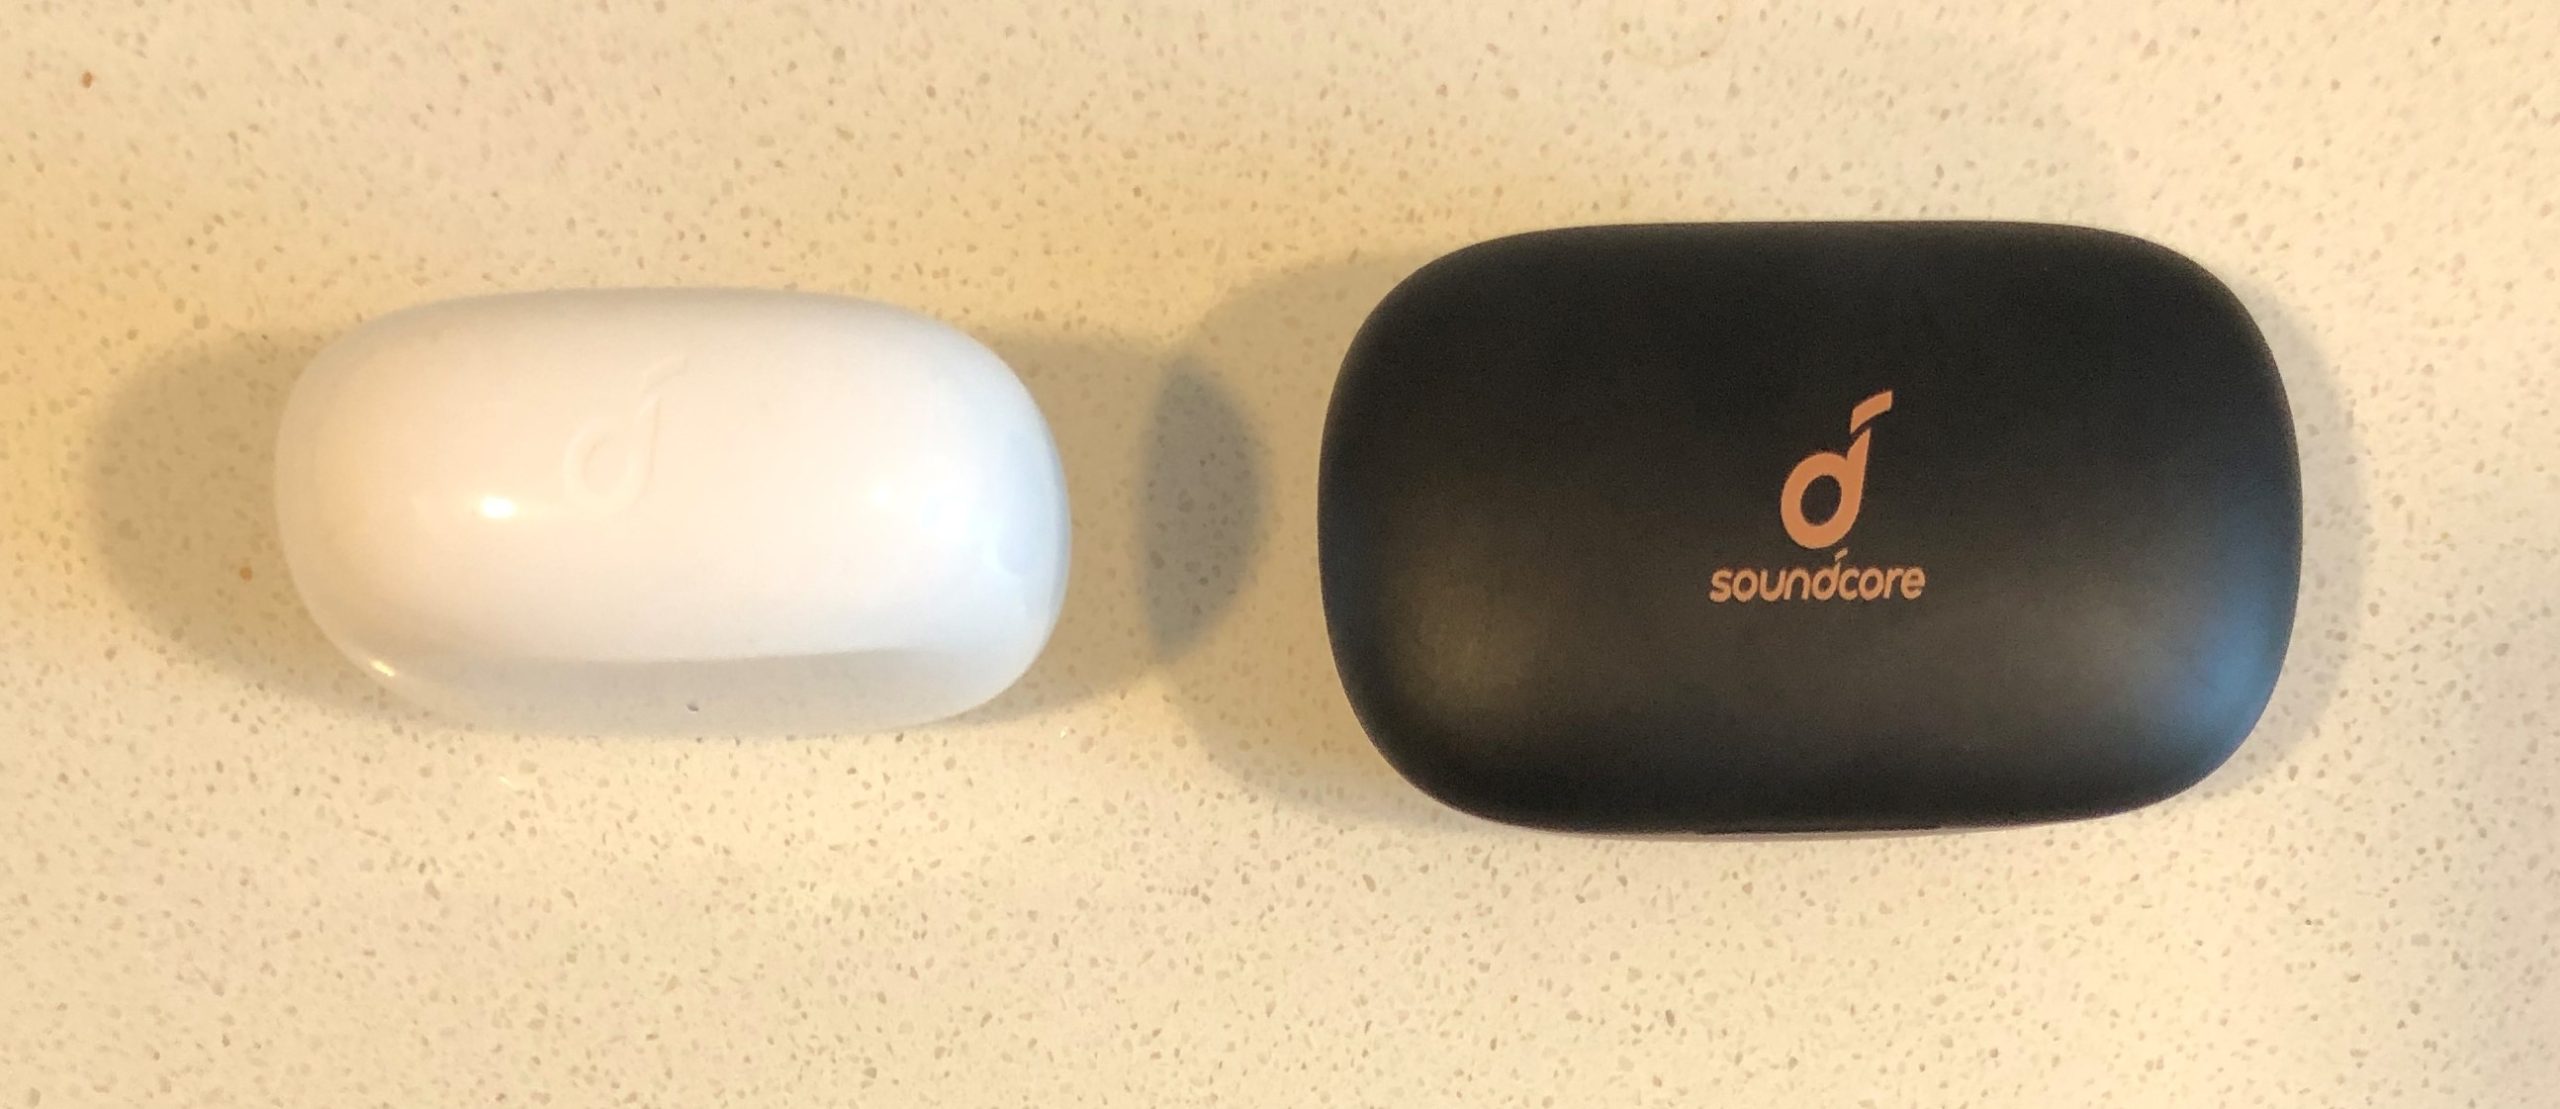 Soundcore Life P2i vs P2 charging and carrying case top view